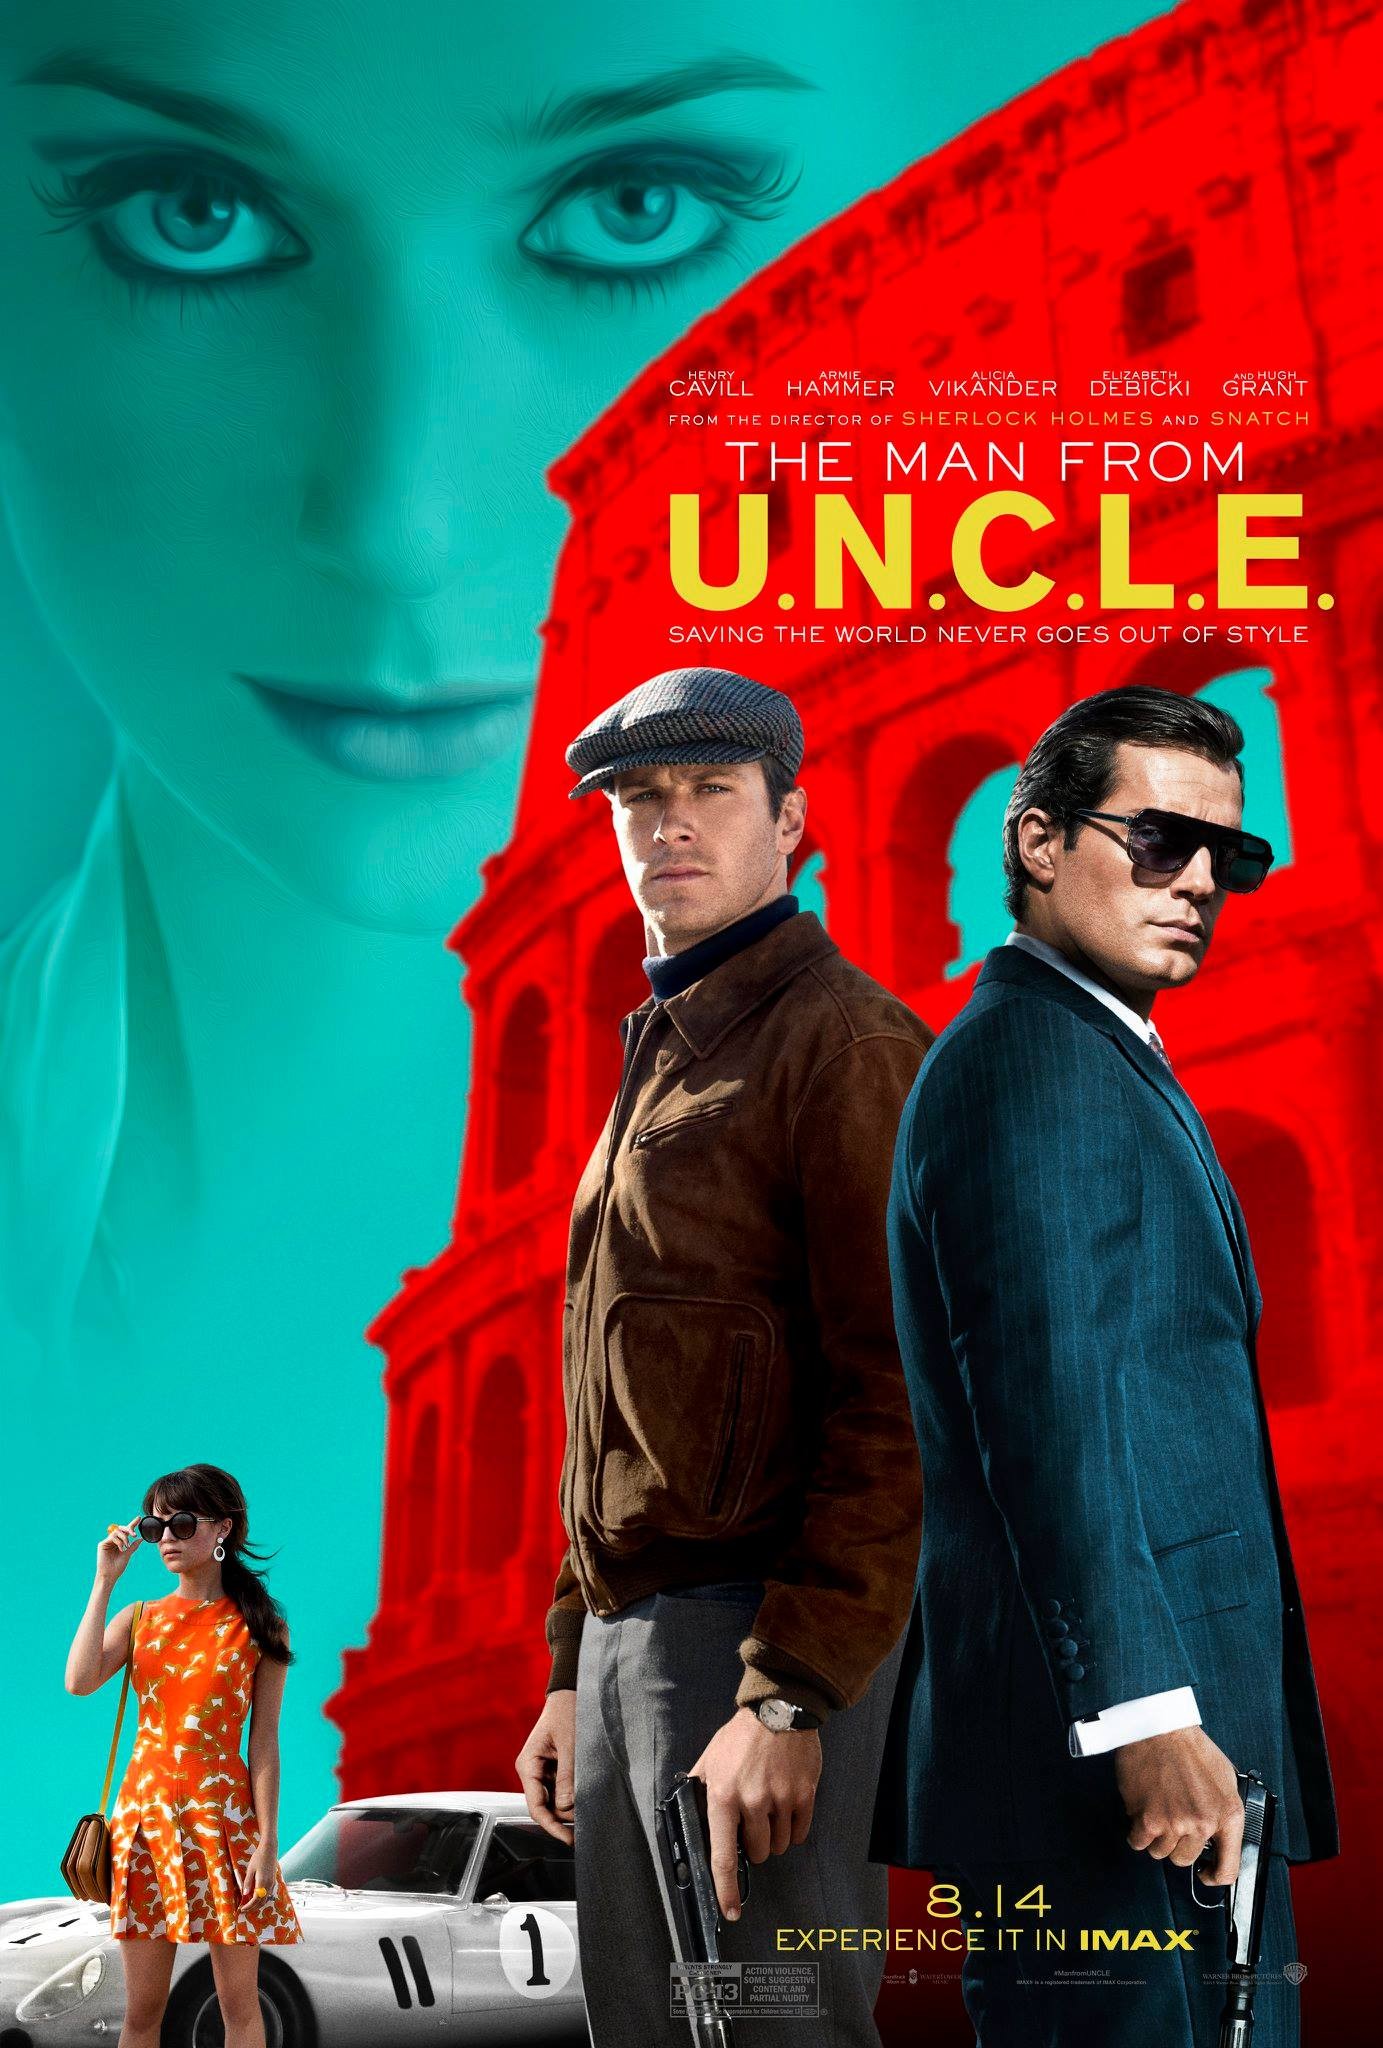 The Man from U.N.C.L.E pic pic